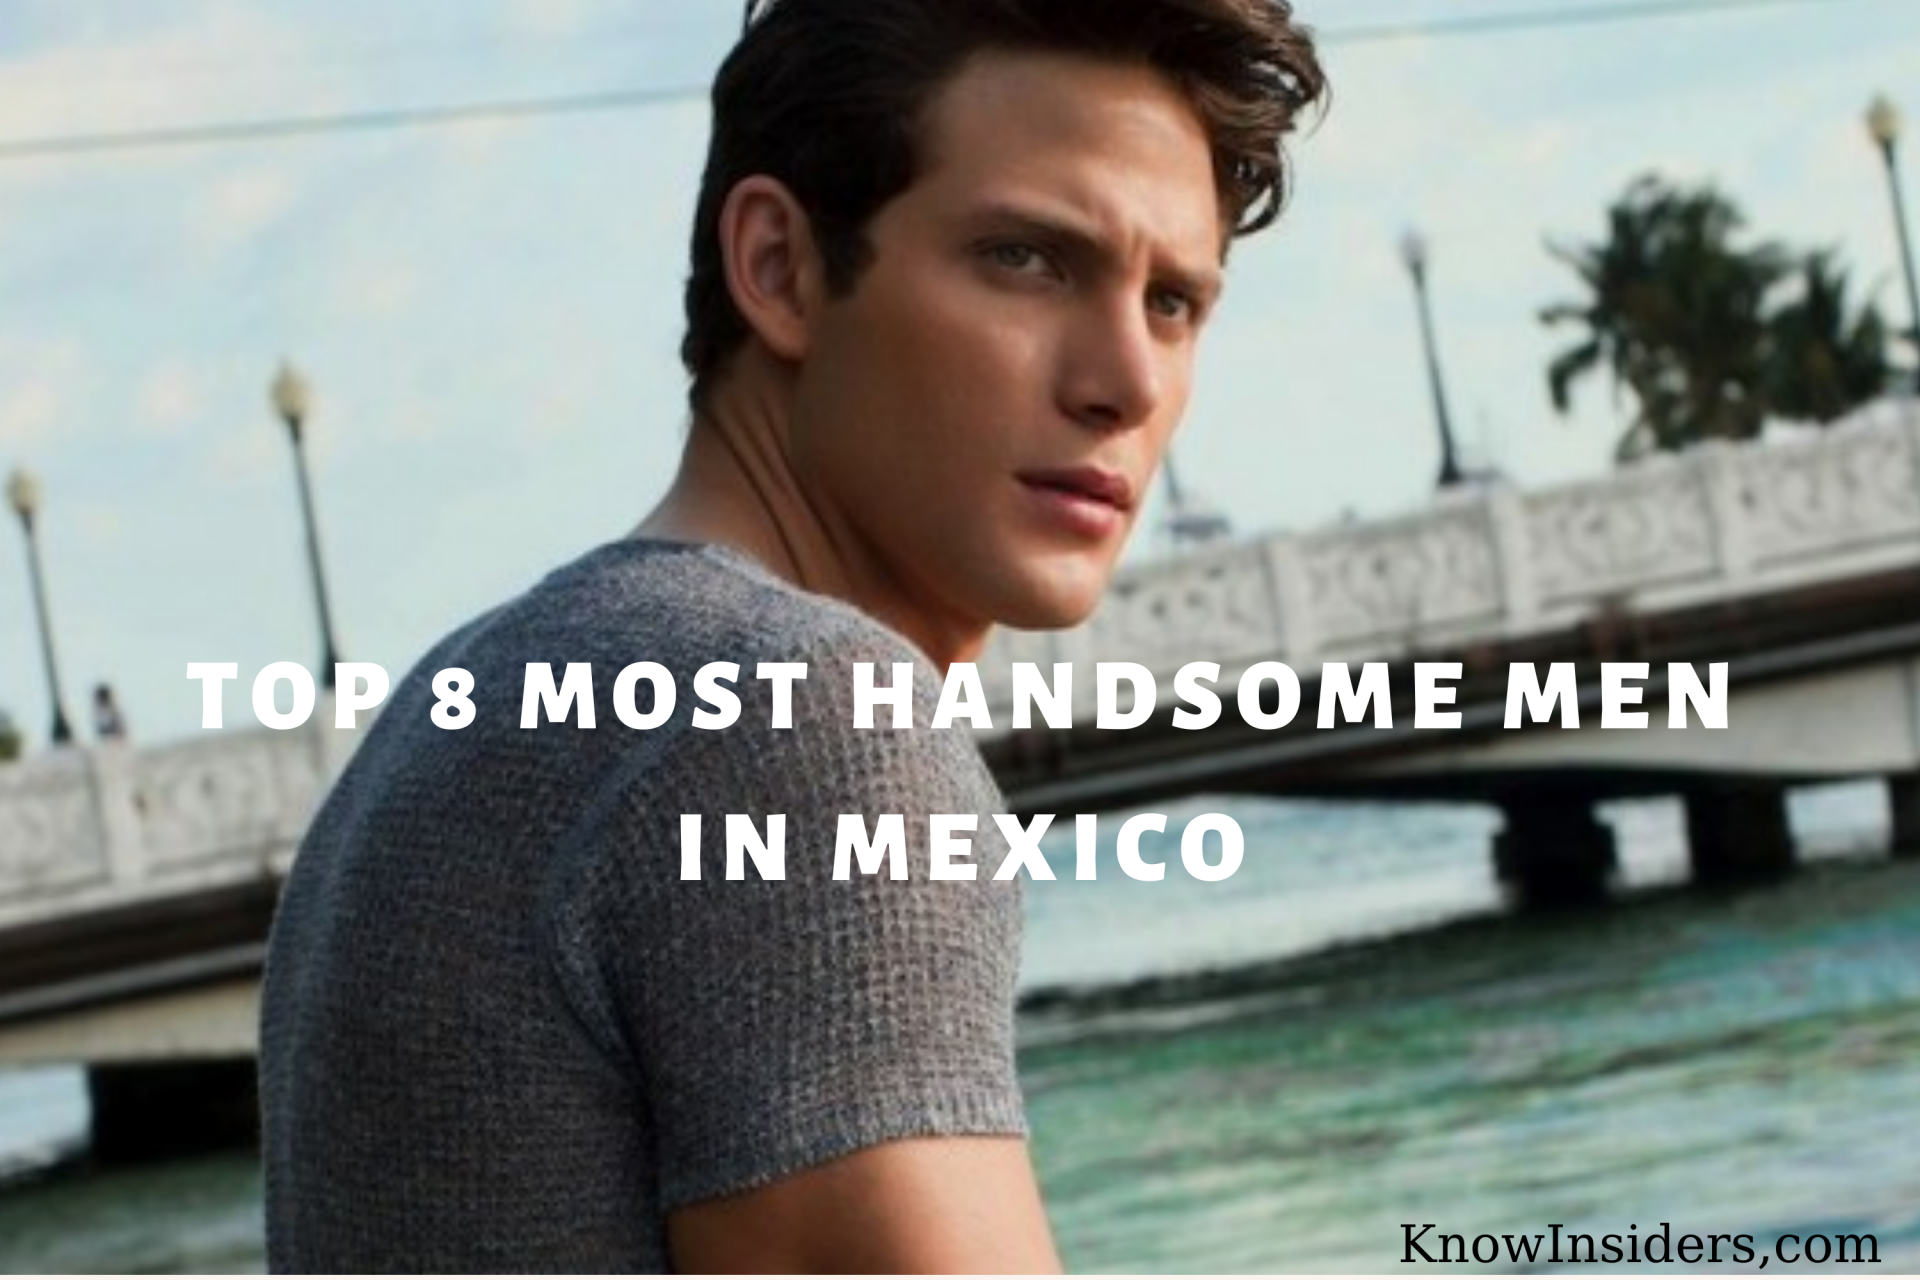 Top 8 Most Handsome Men in Mexico